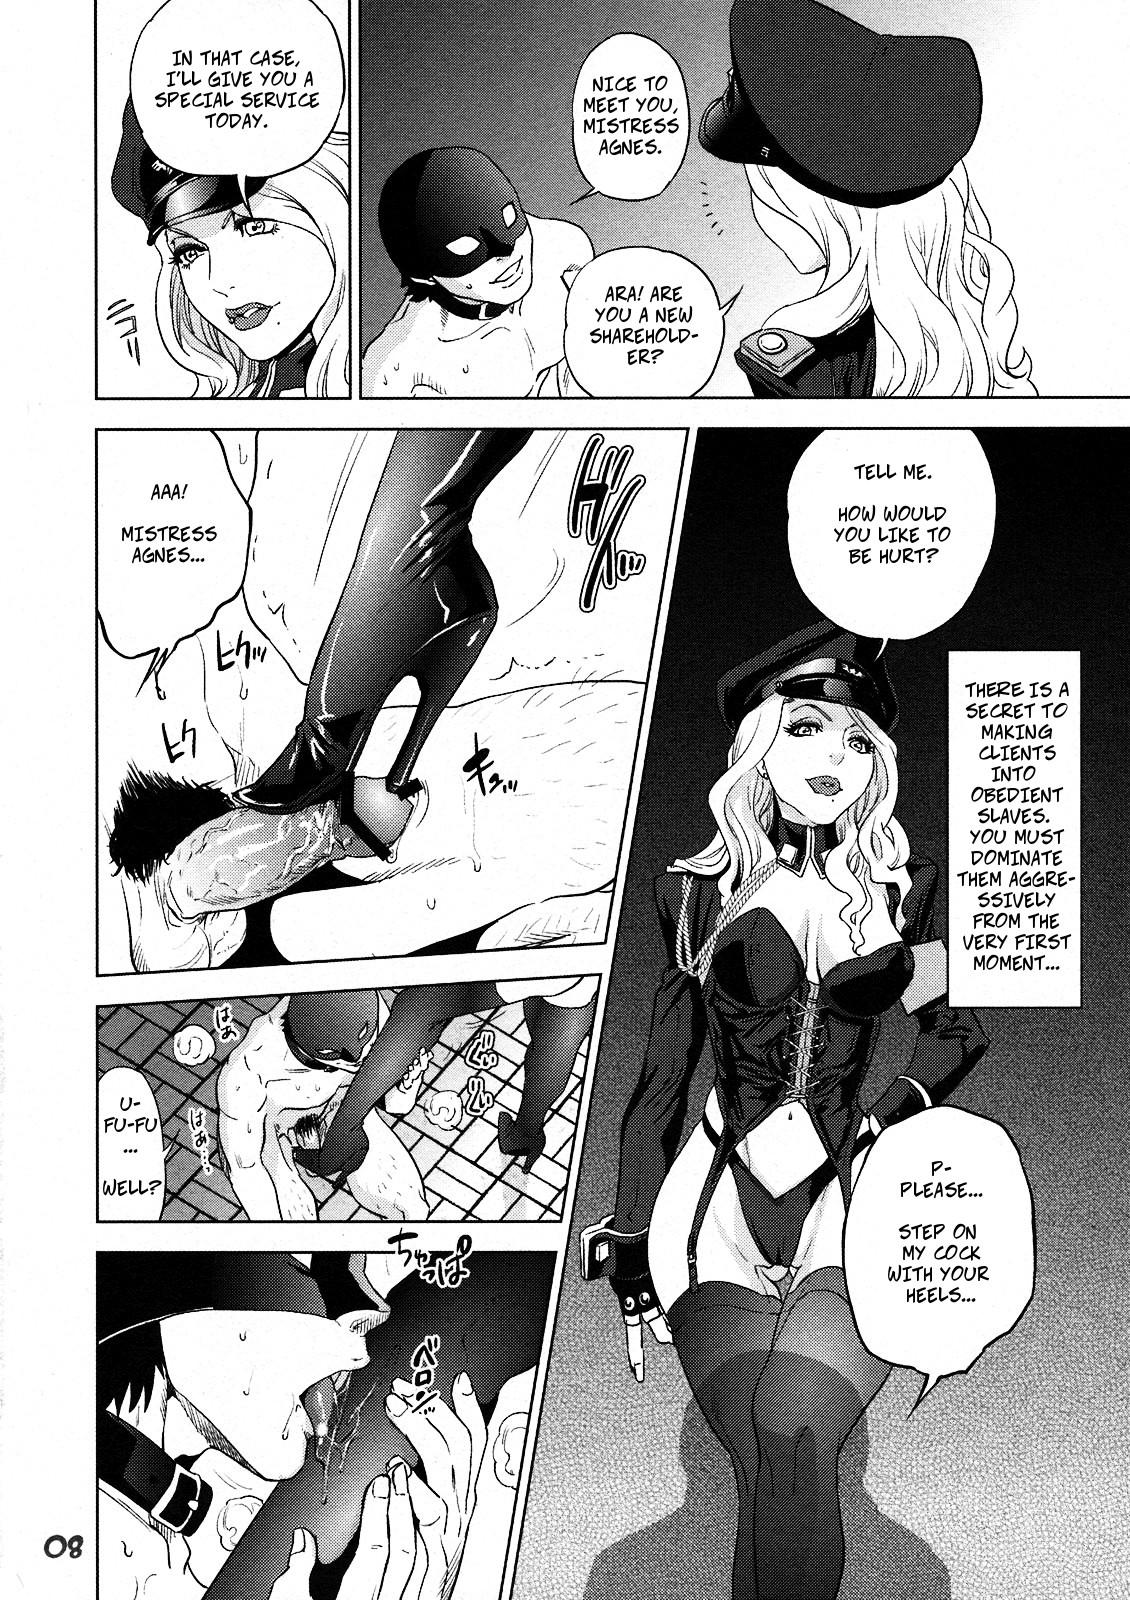 Free Amature Porn Agnes-san Oshigoto desu! | It's Time For Work, Ms. Agnes! - Tiger and bunny Anal Play - Page 8